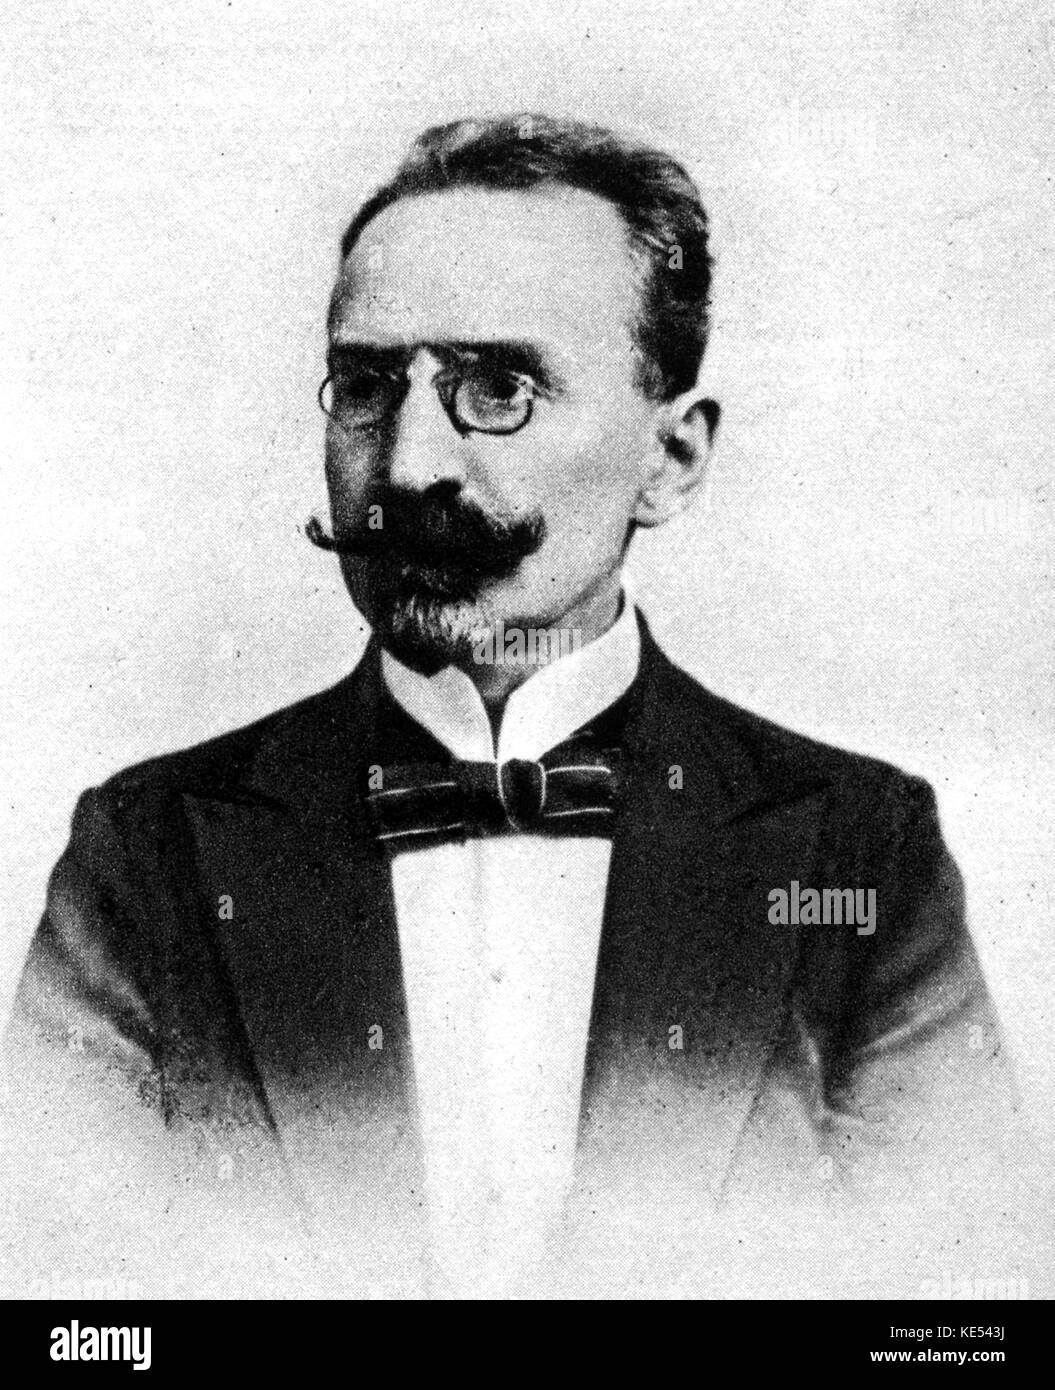 Alexander Polinski / Polinsky , Polish critic and musicologist .  He recognised Szymanowkis as an outstanding composer. Stock Photo